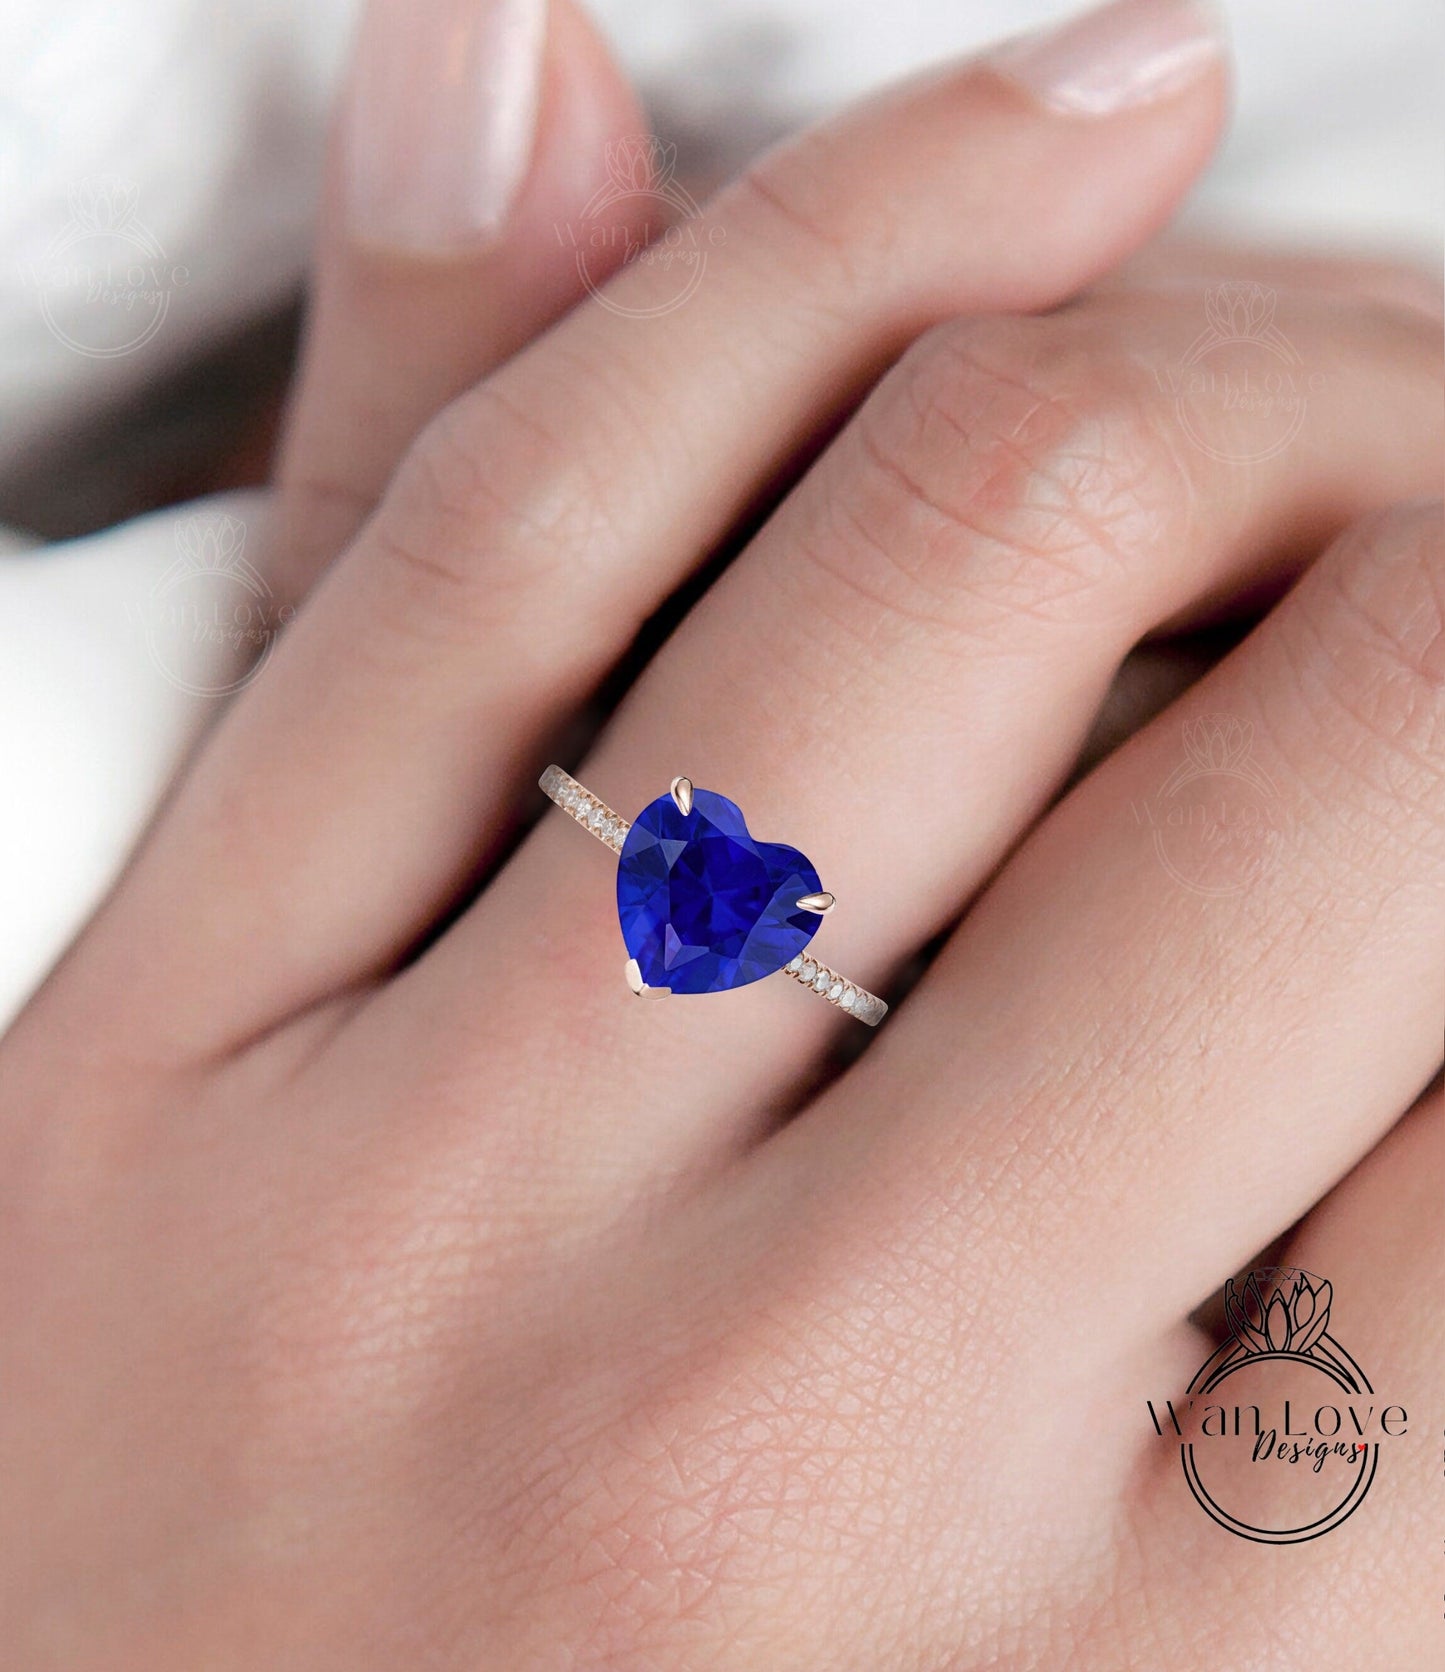 Heart cut Blue Sapphire Ring Heart Shaped Celebrity Engagement Ring 14k white Gold Ring Women Anniversary Gift Ring Bridal Gift Ring Wan Love Designs